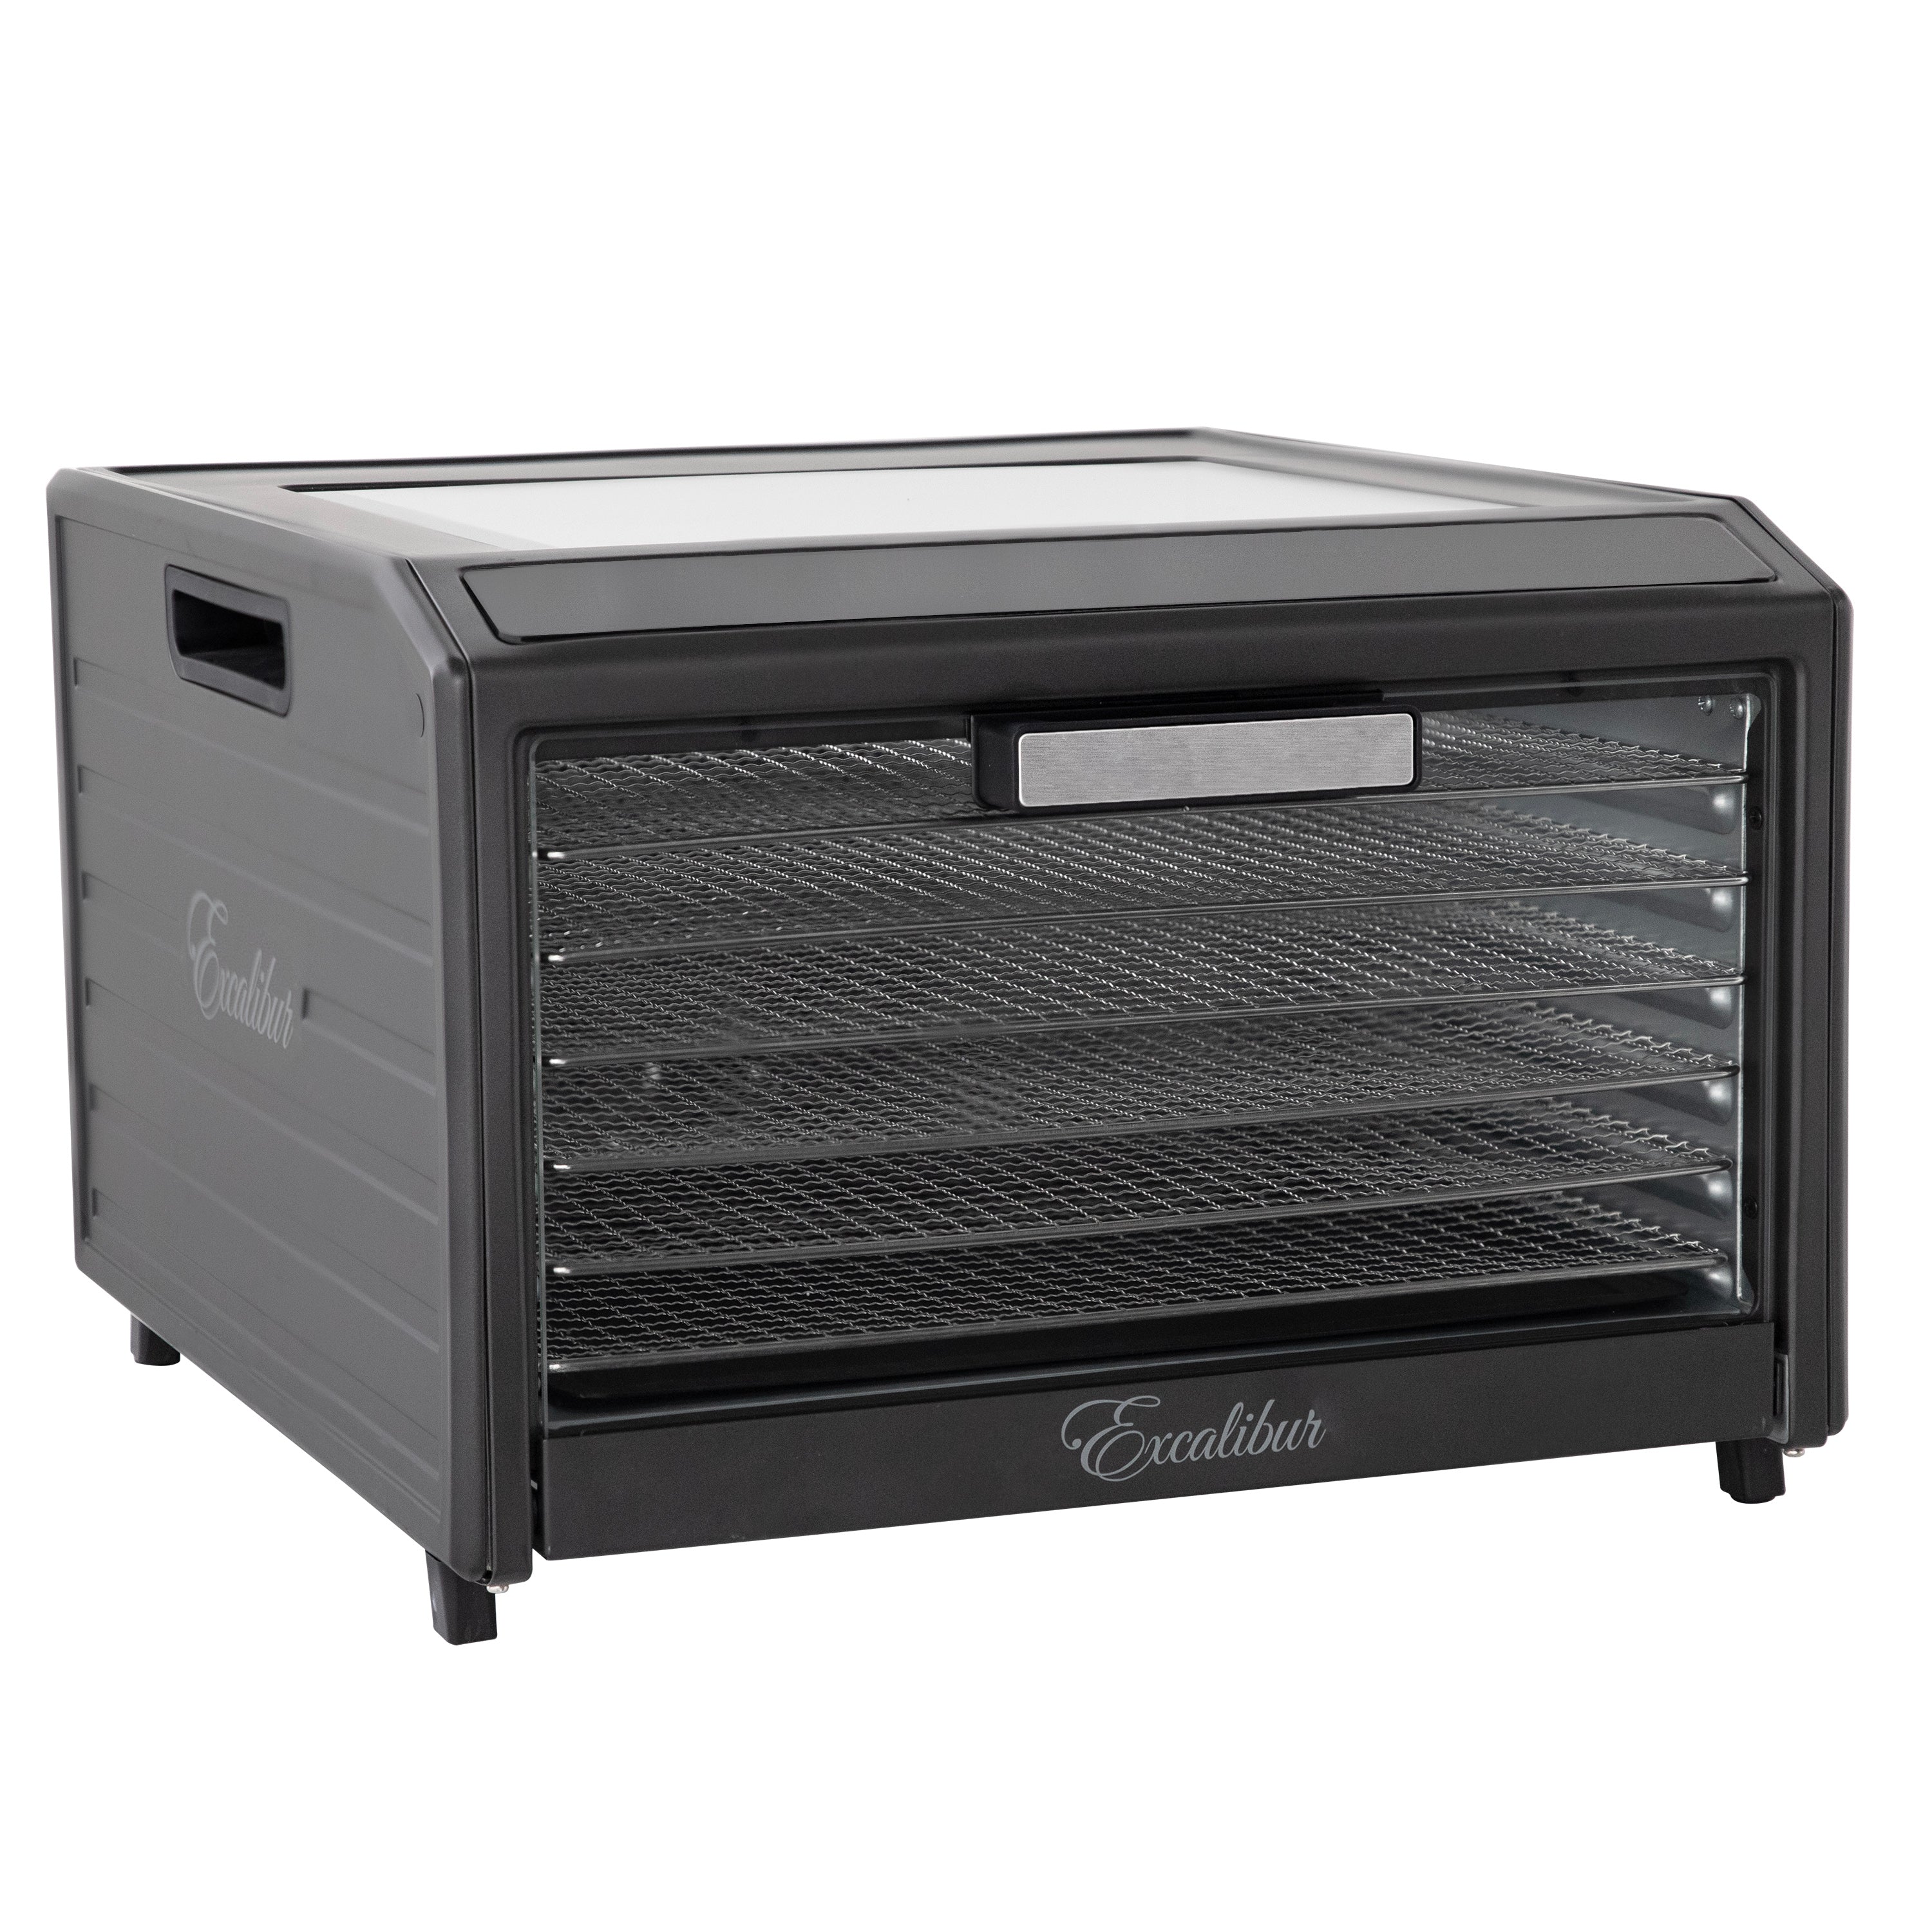 Excalibur 6 Tray Performance Digital Dehydrator, in Stainless